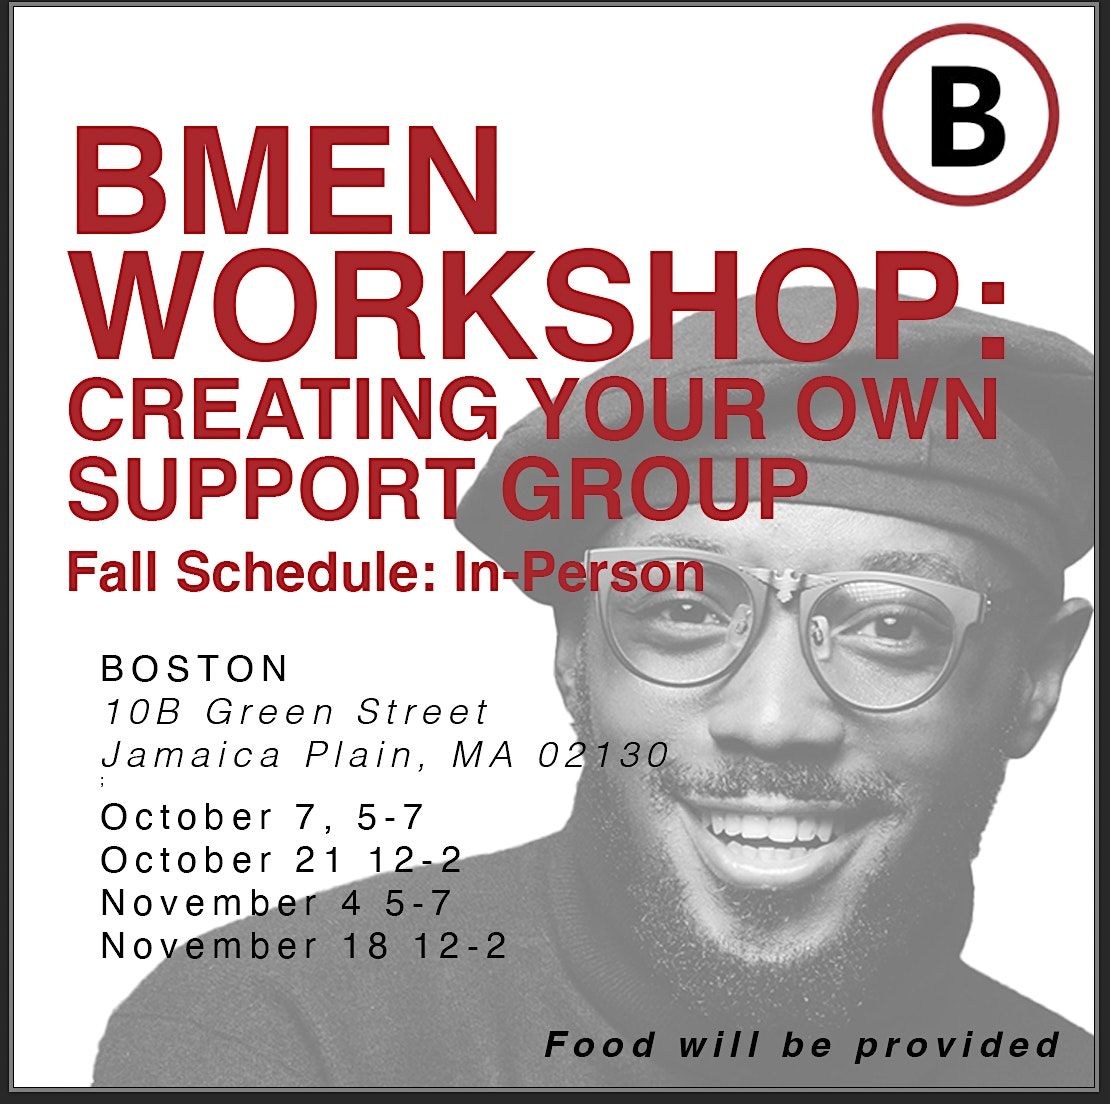 BMEN workshop: Creating your own support group